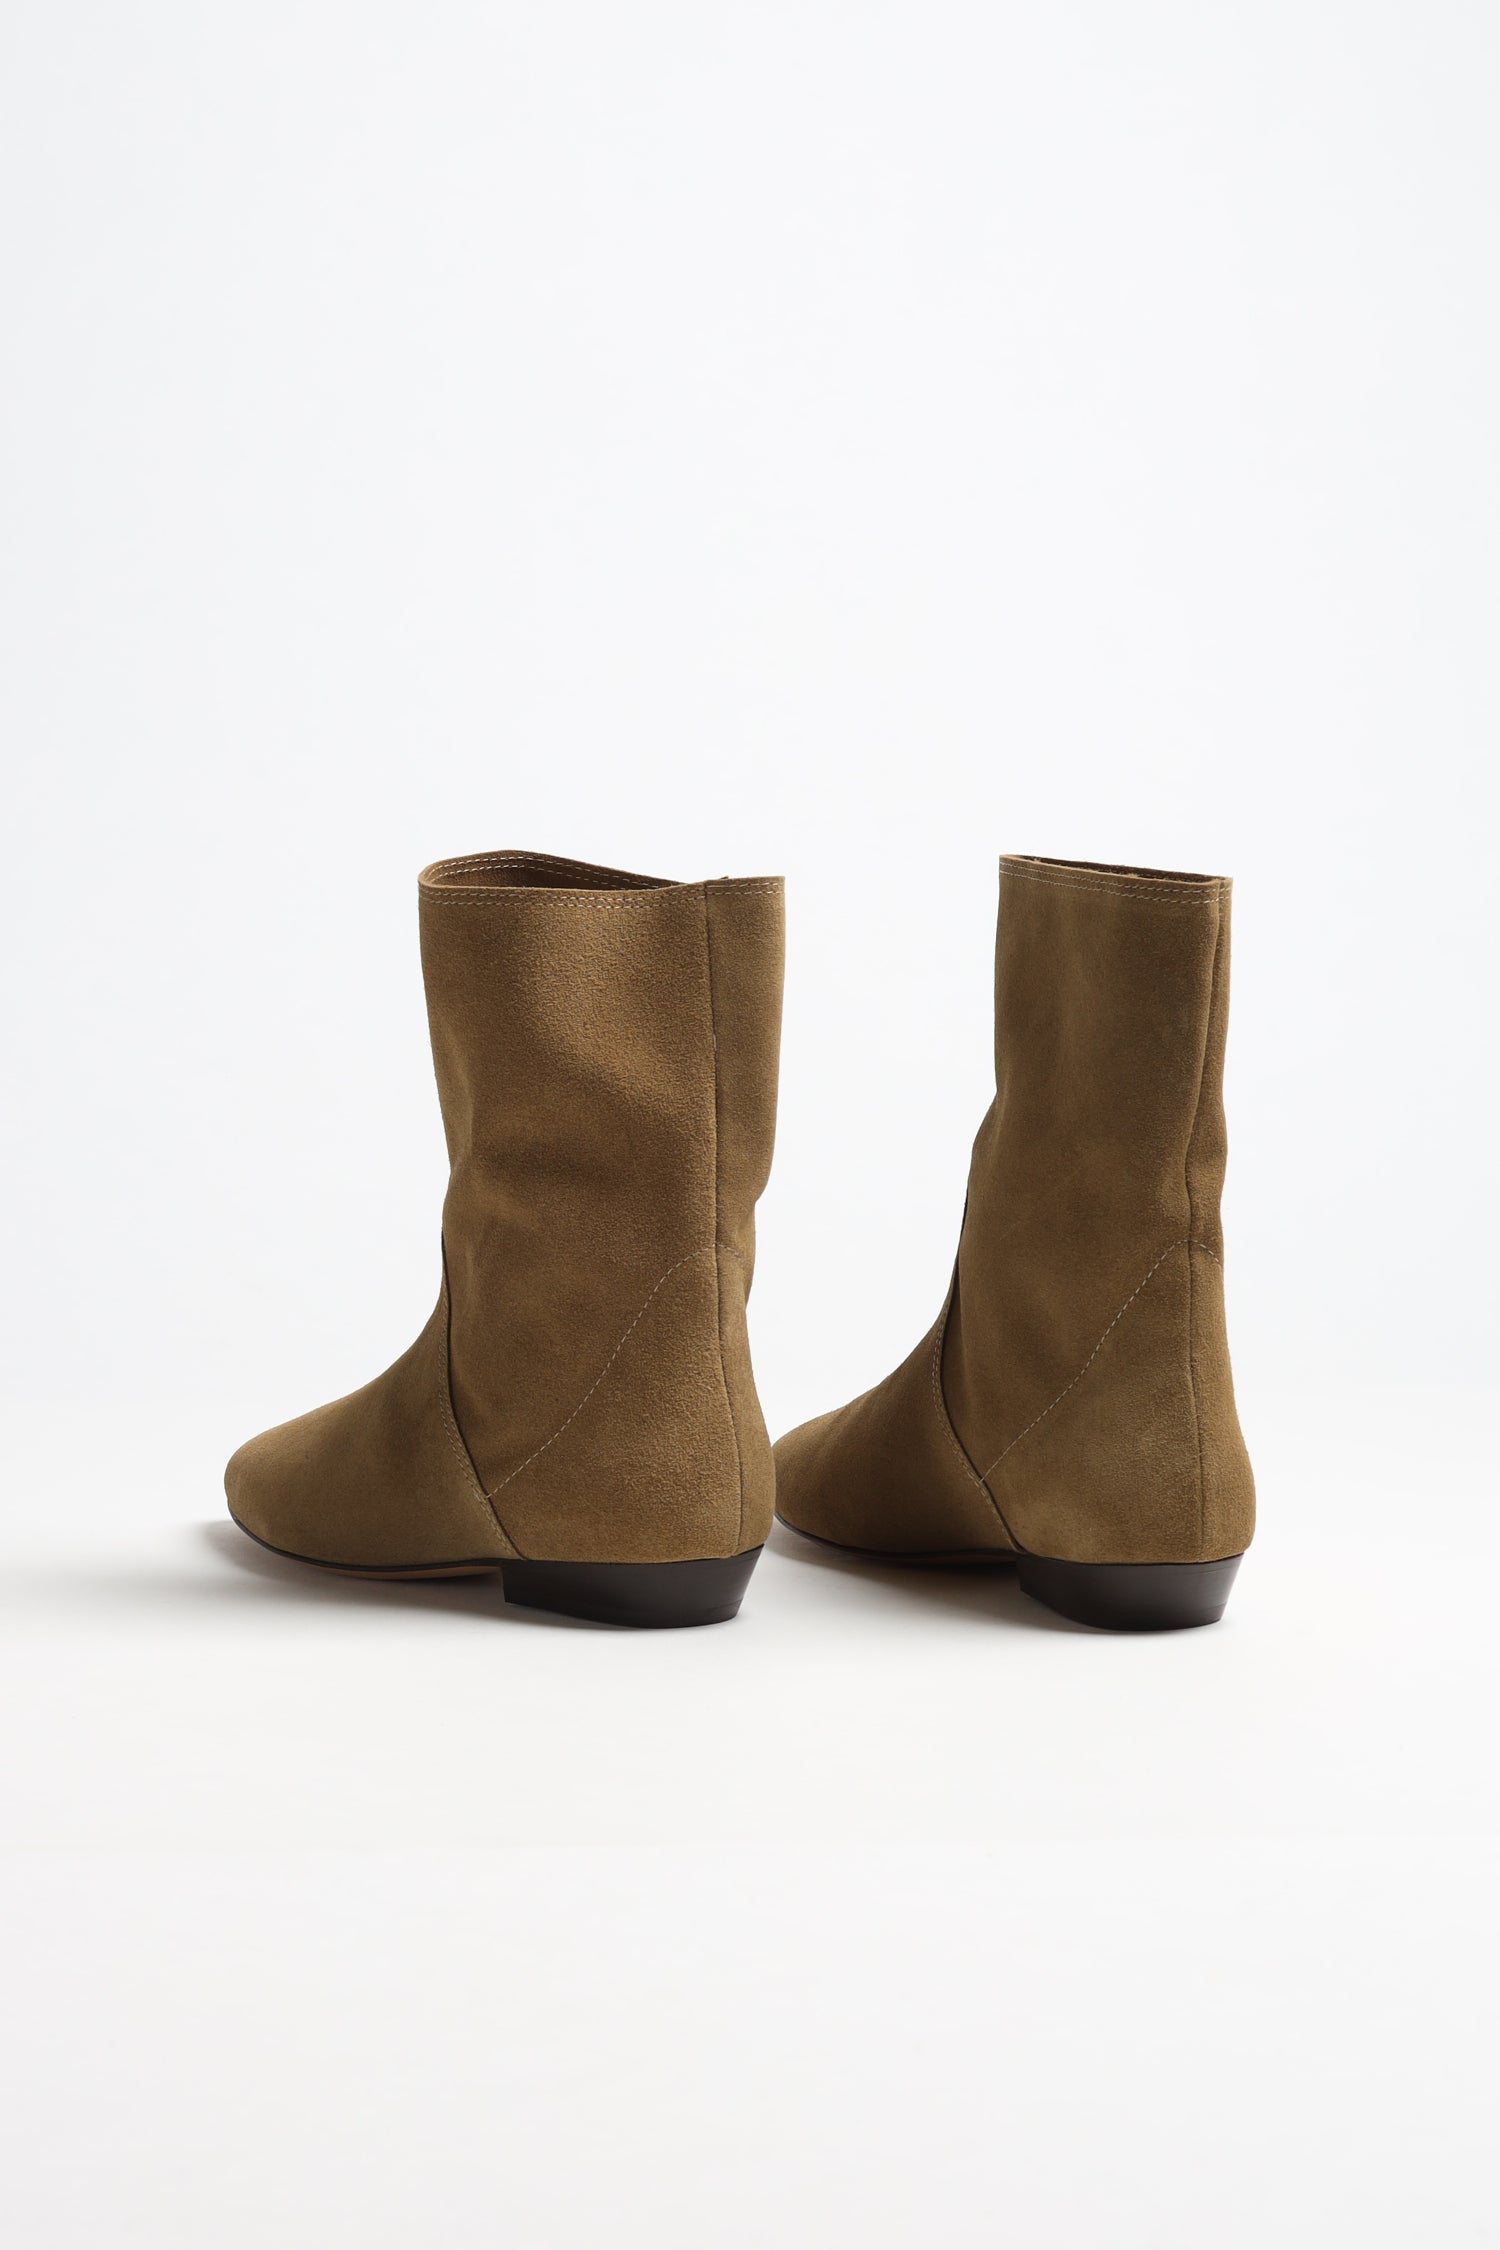 Boots Slaine in TaupeIsabel Marant - Anita Hass